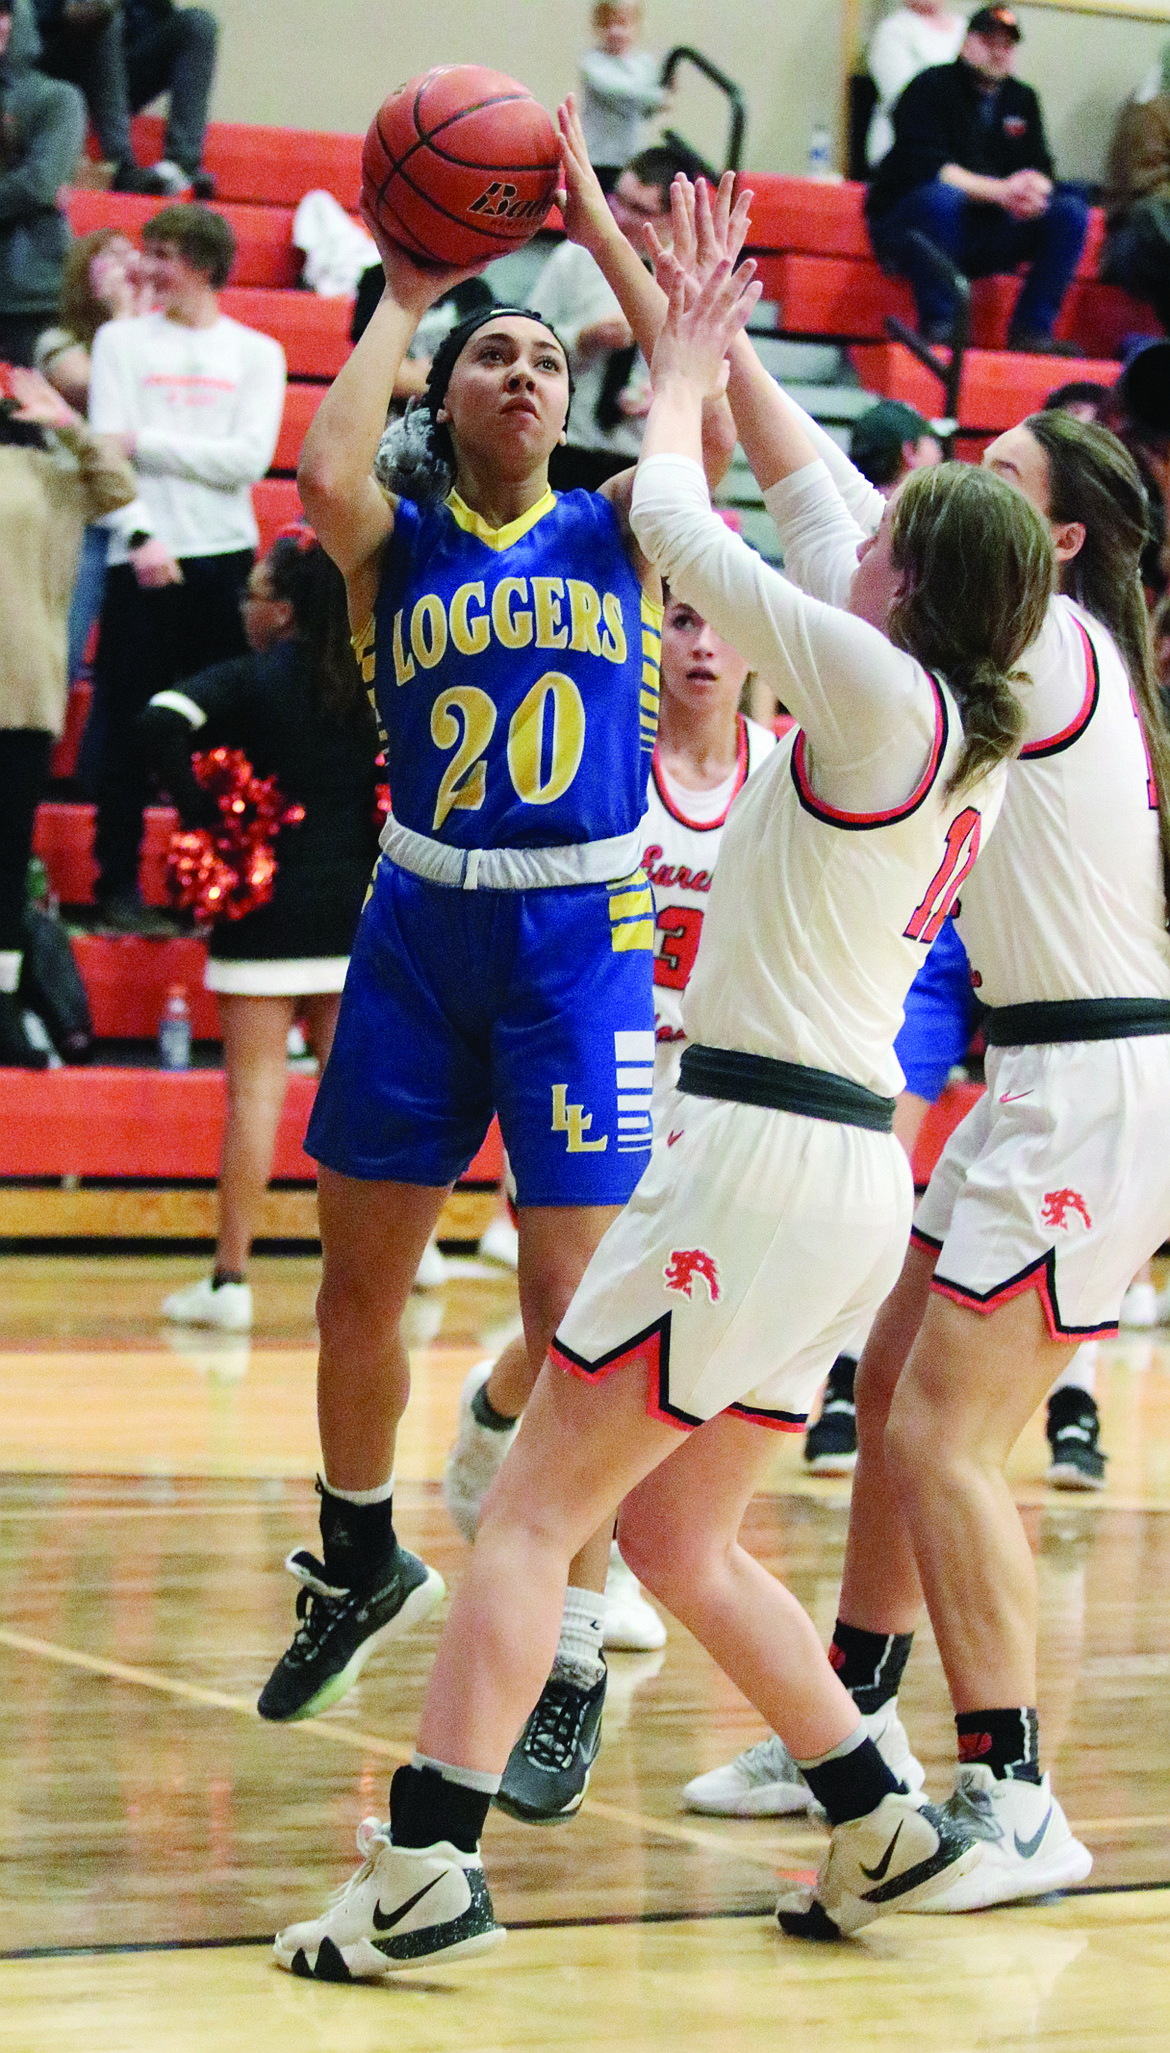 Despite heroics by Olivia Gilliam-Smith, the Lady Loggers fell to the Eureka Lady Lions 41-28, leaving the team at 1-6 for the season. (Photo courtesy Tobacco Valley News)